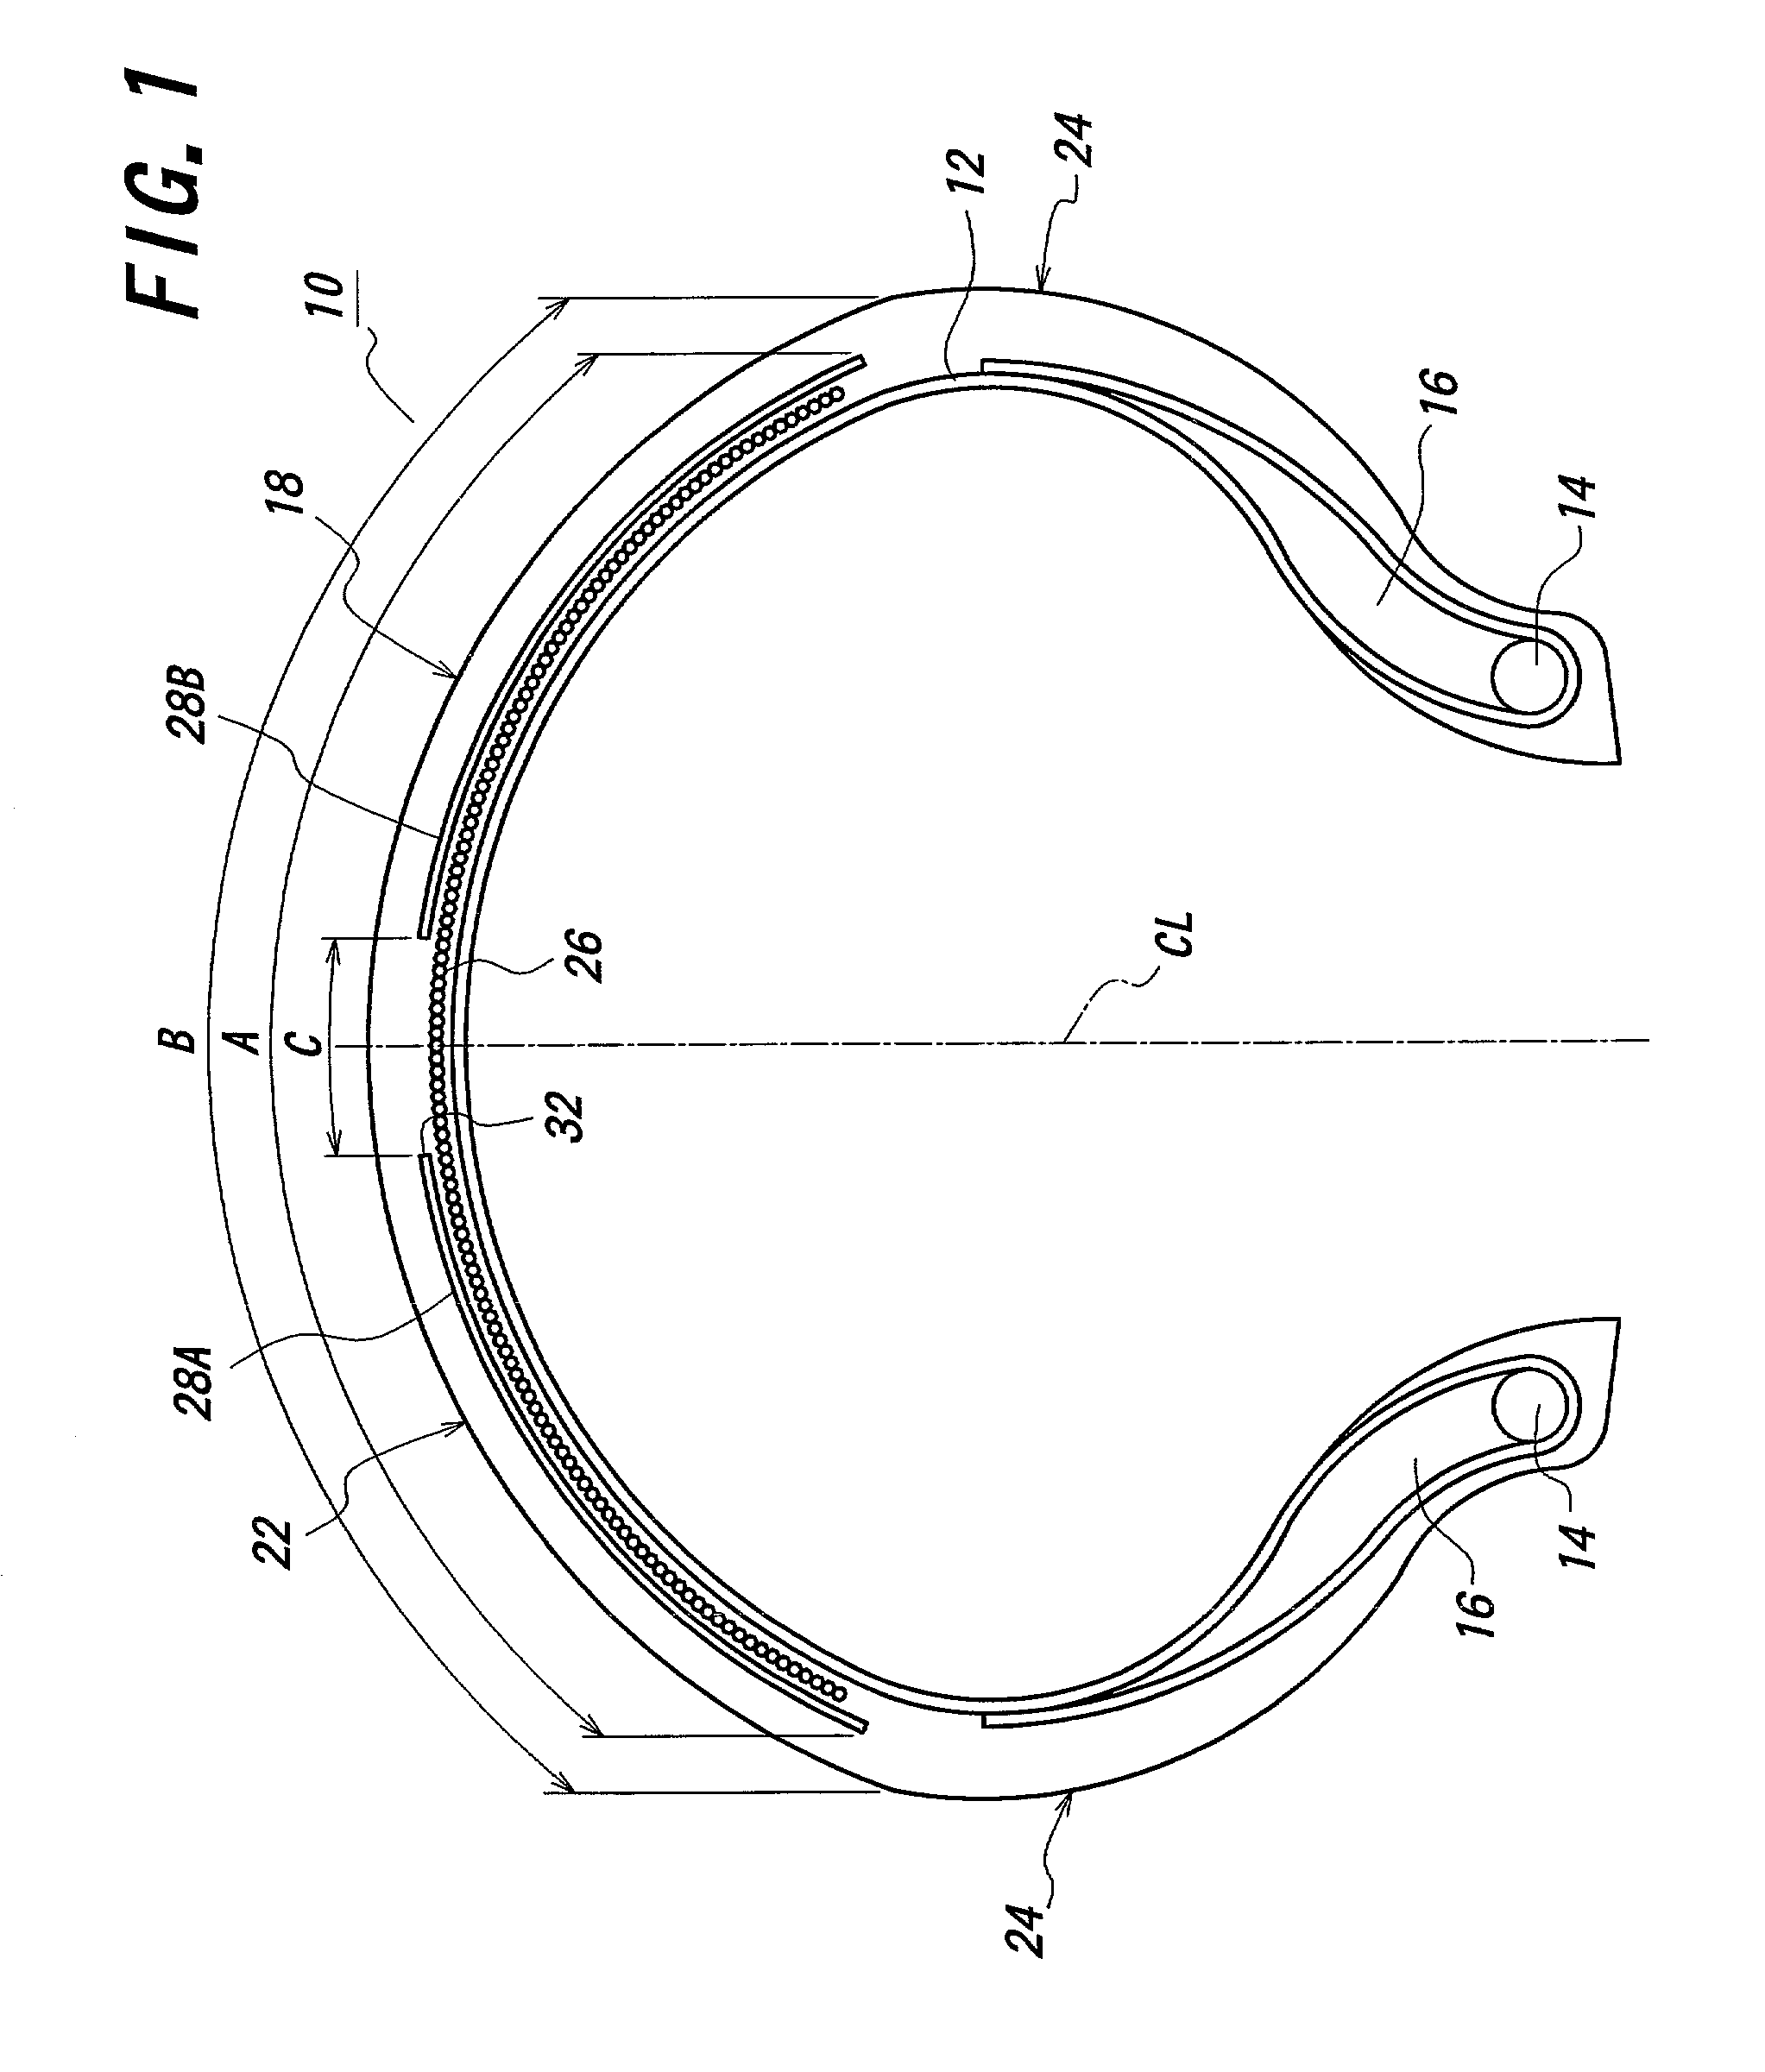 Method of mounting a pneumatic radial tire